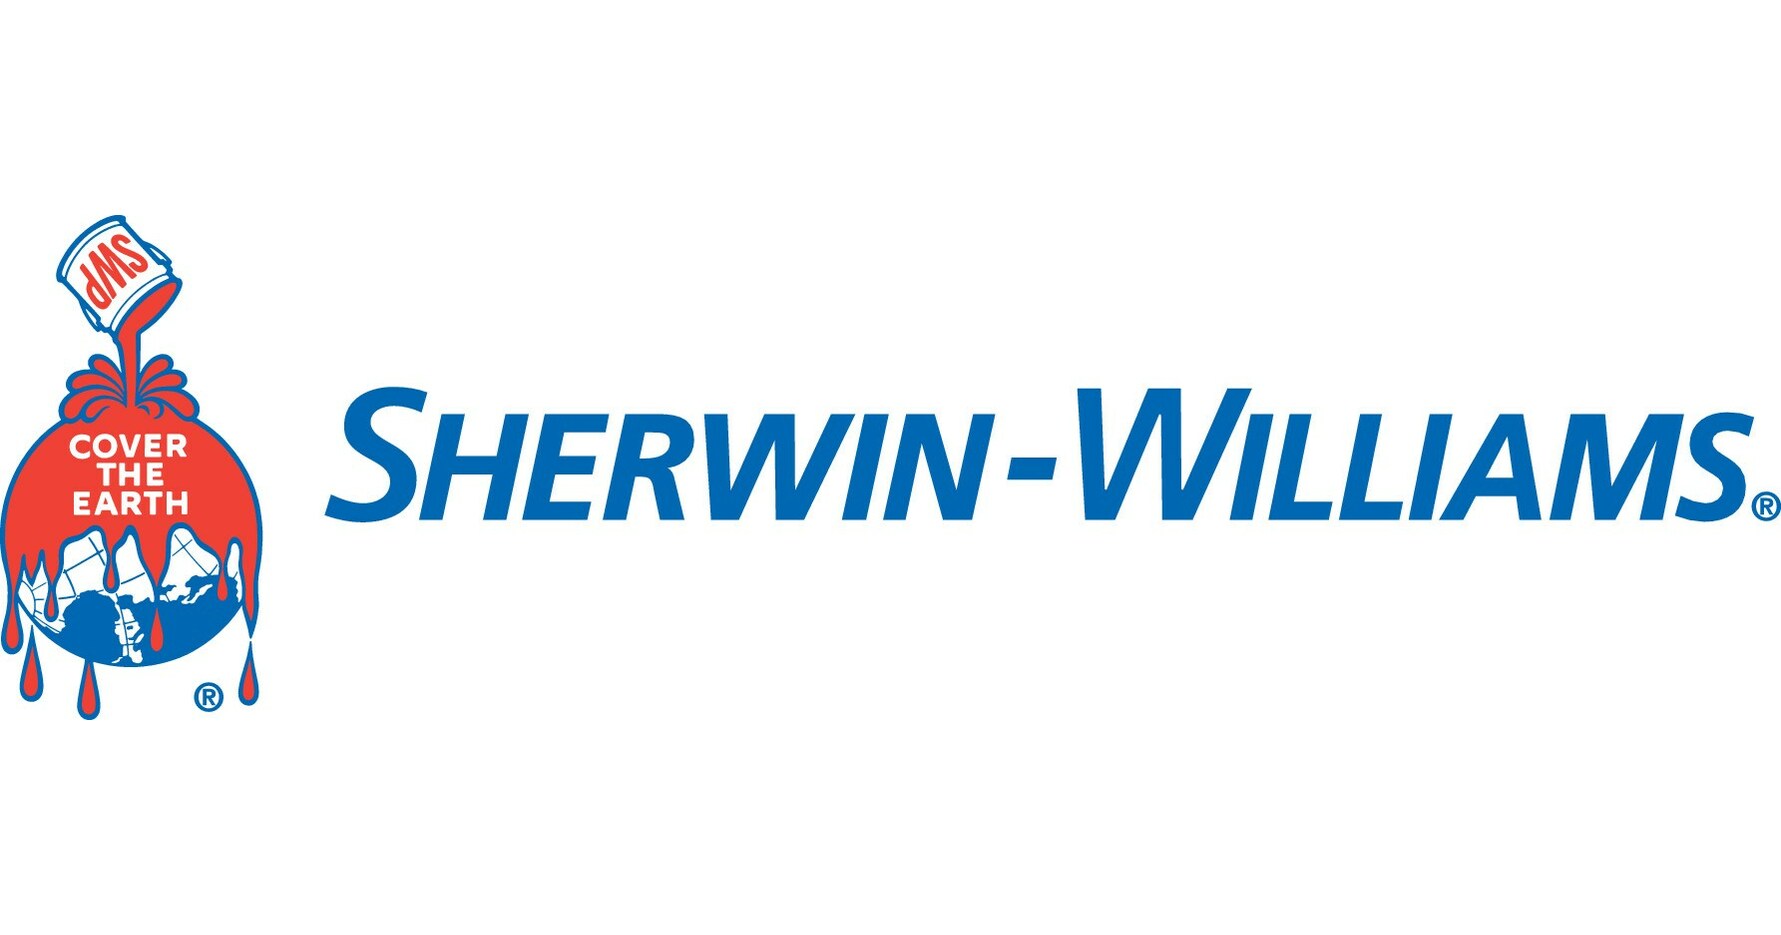 19-facts-about-sherwin-williams